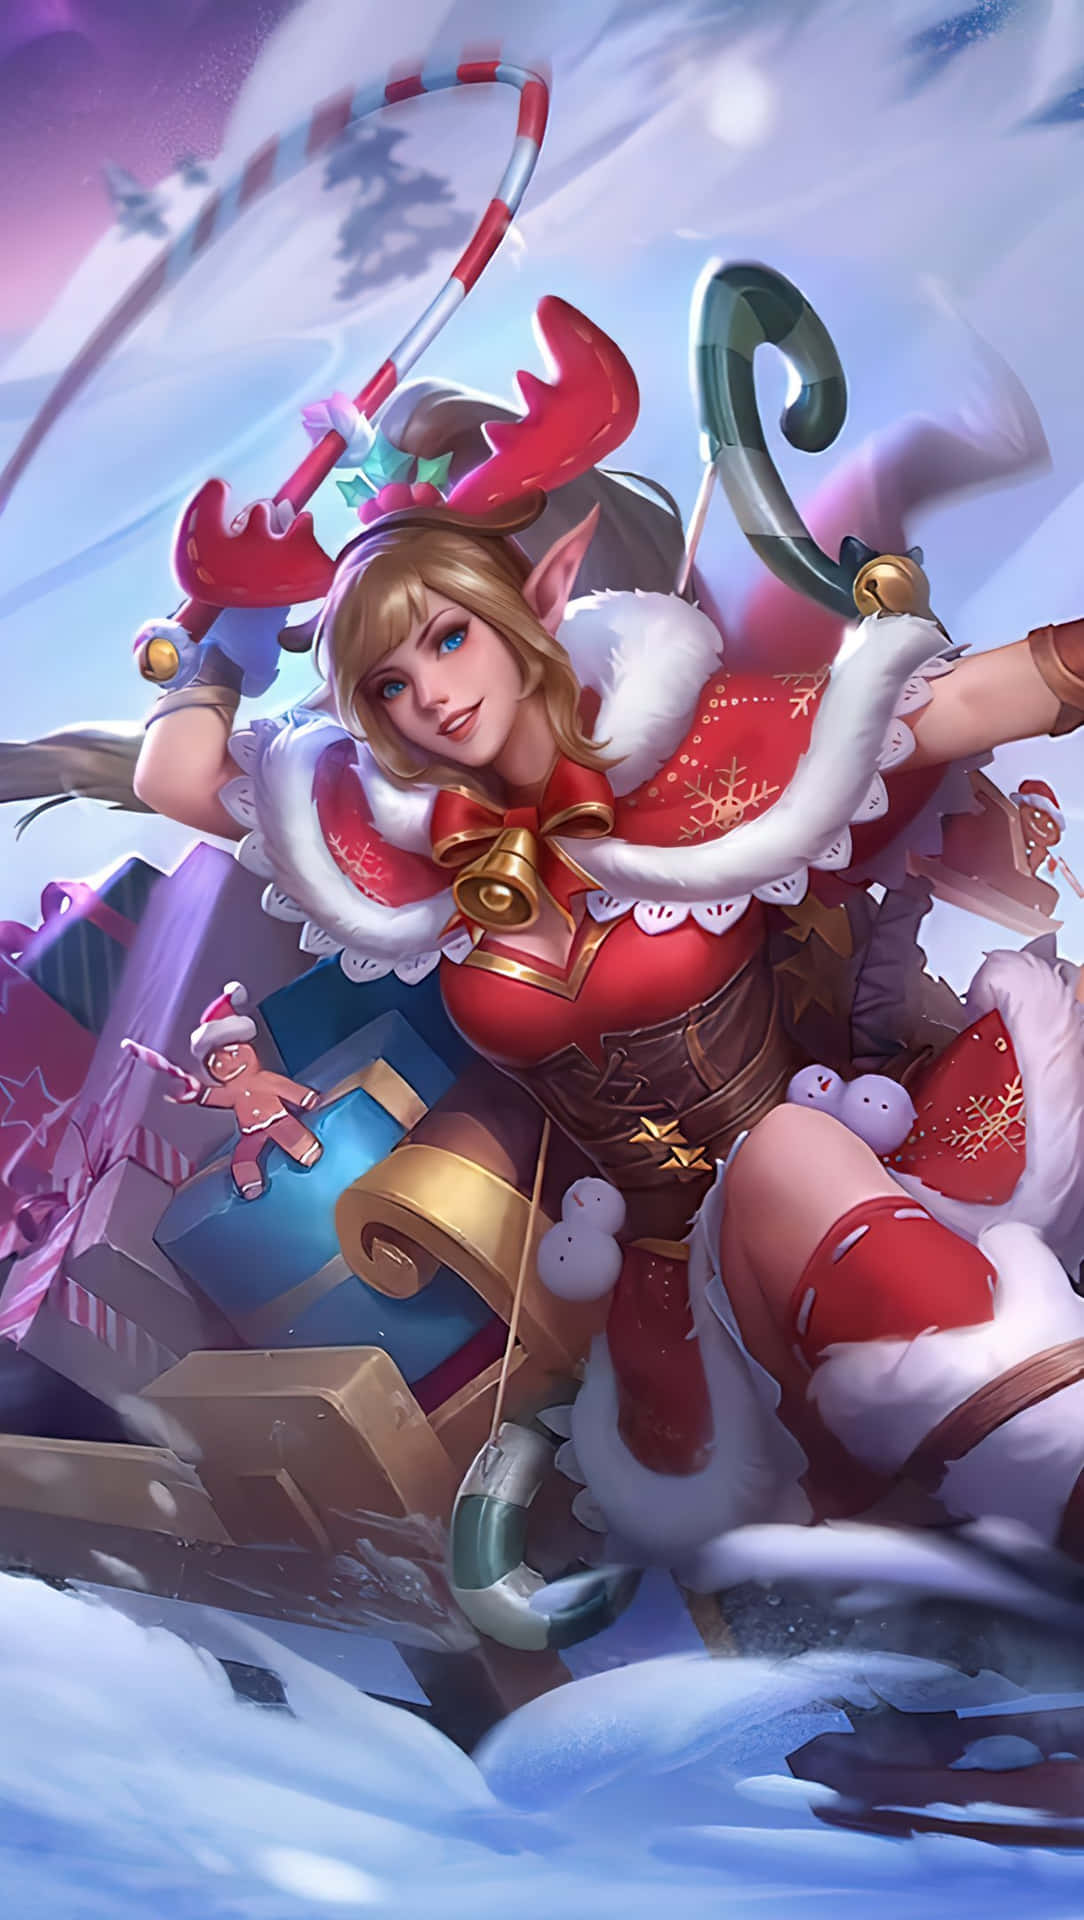 Miya Mobile Legend Riding On A Reindeer Carriage Background